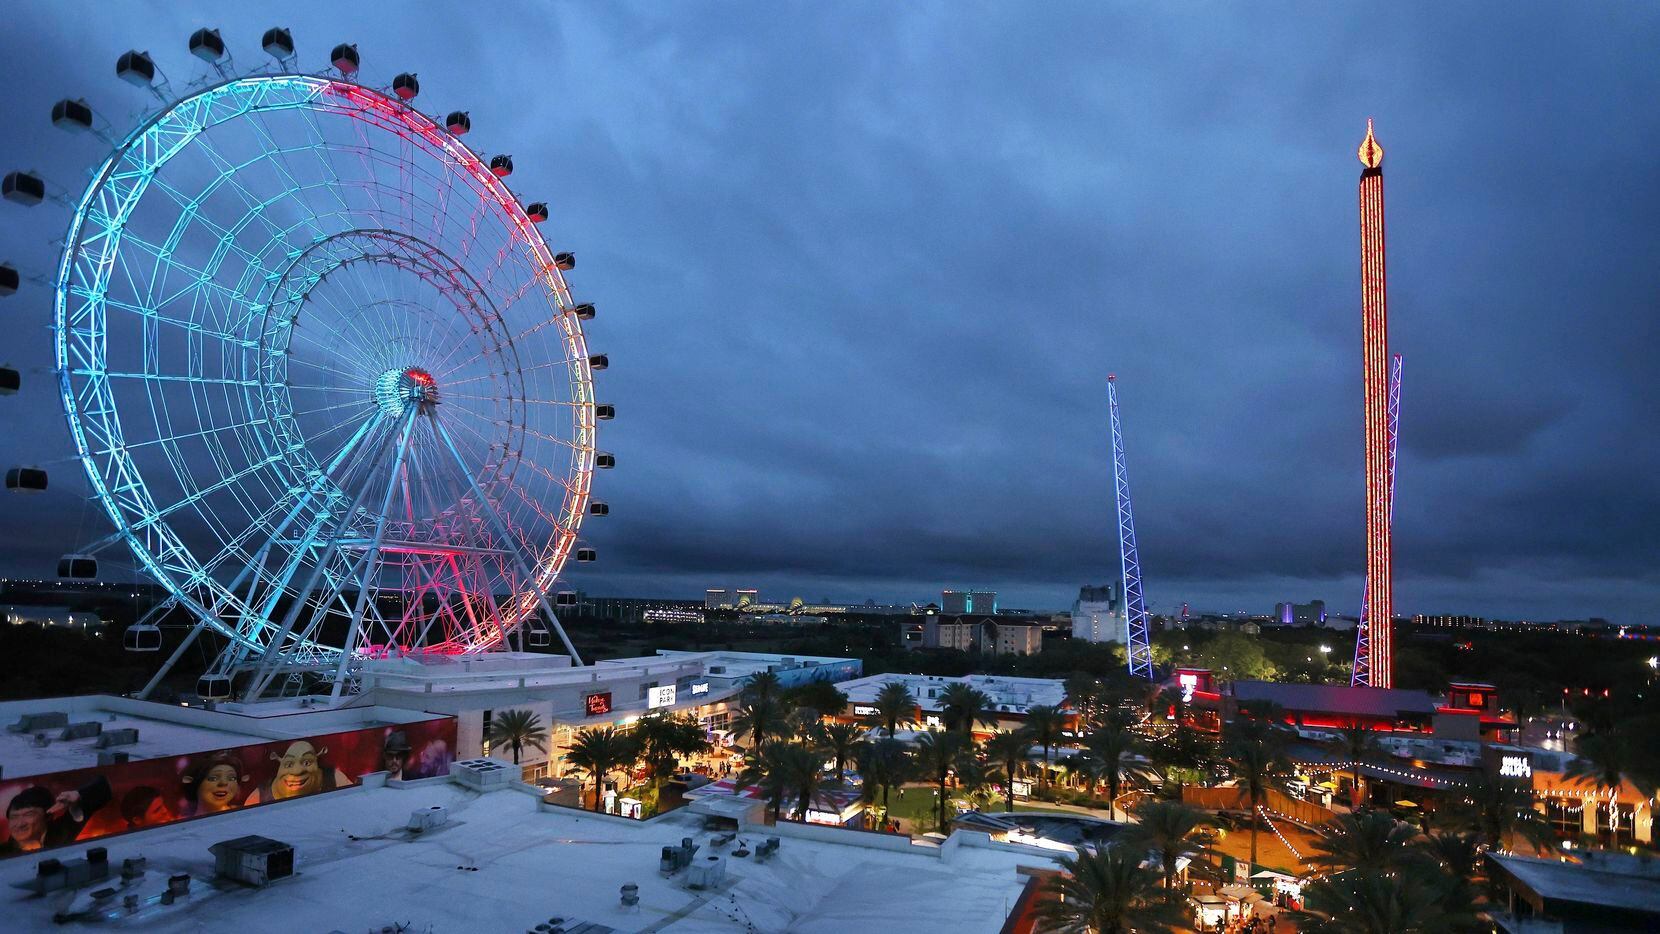 The Orlando, Fla., amusement park where a teenager fell from a ride and died earlier this...